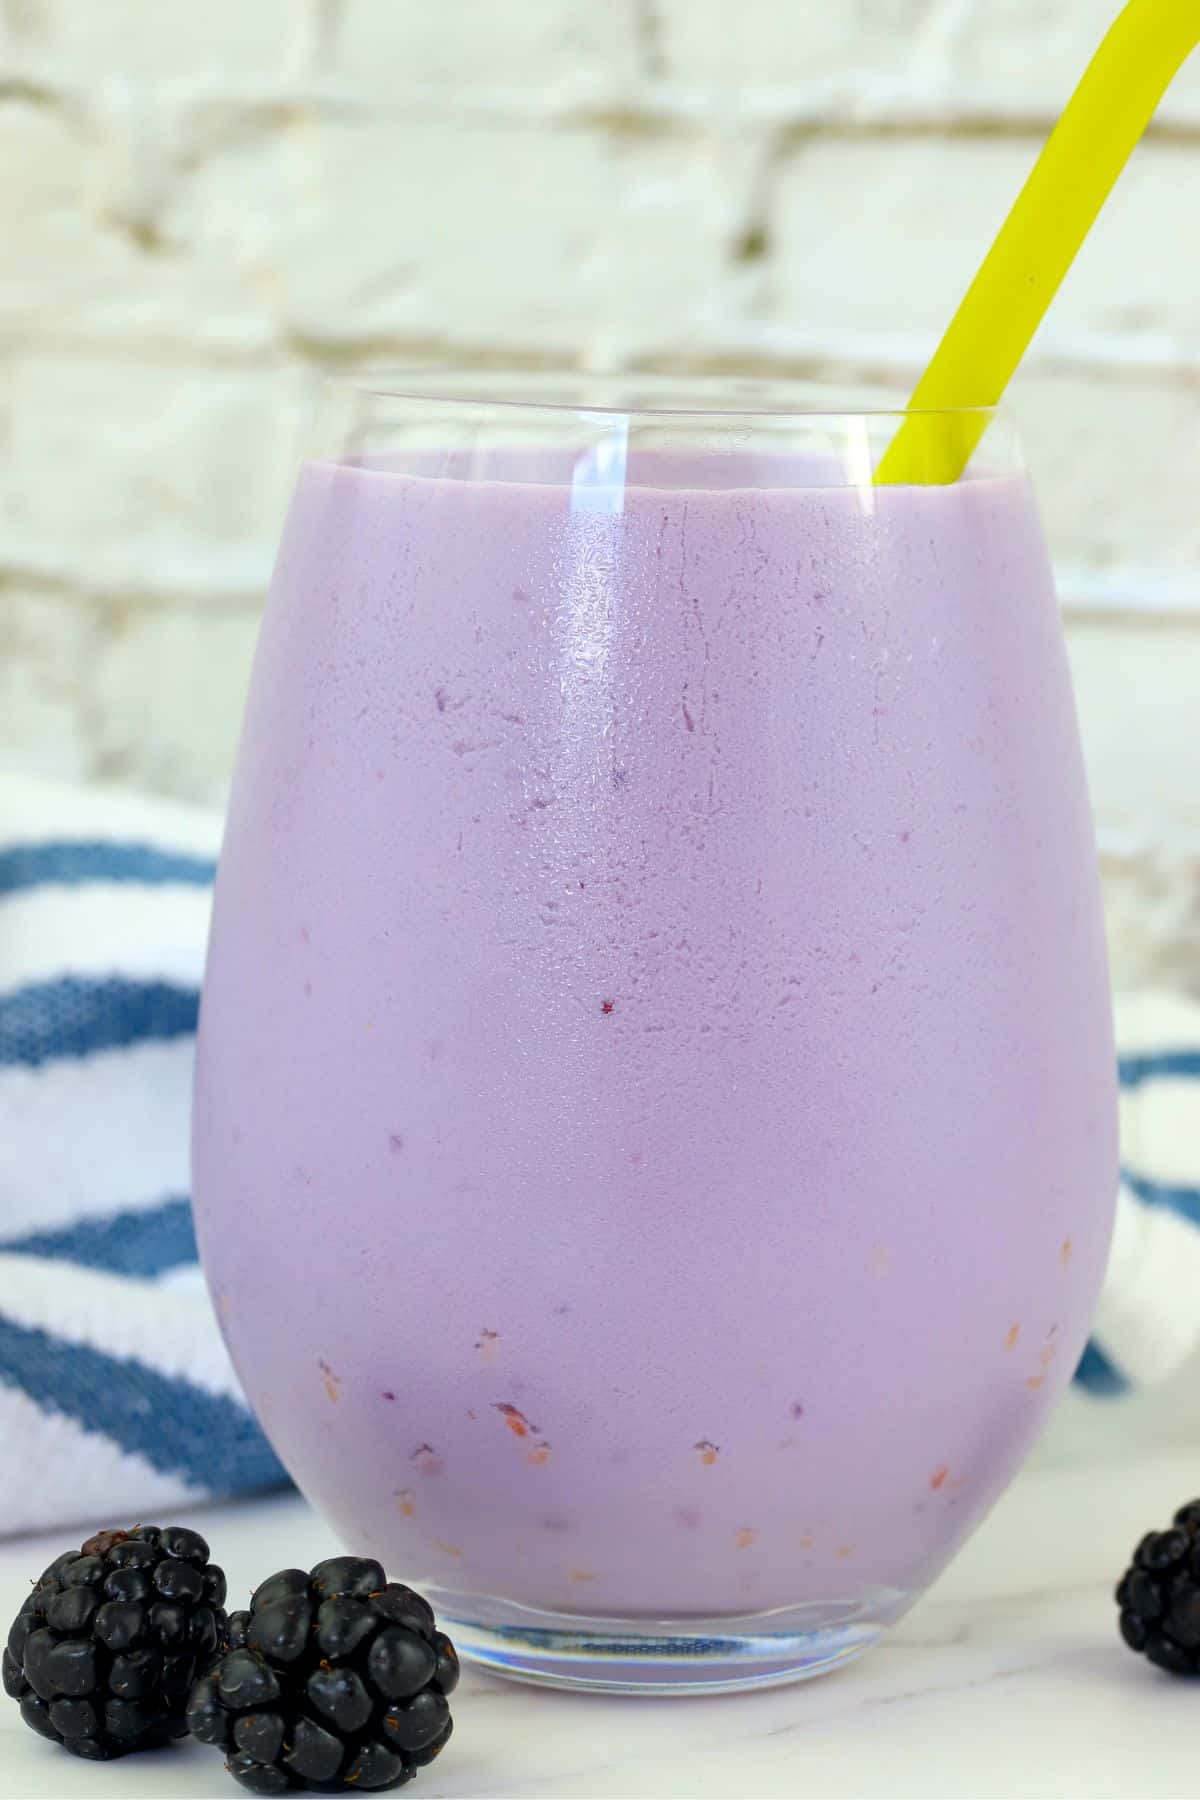 low carb blackberry smoothie with a yellow straw and fresh blackberries on the side.